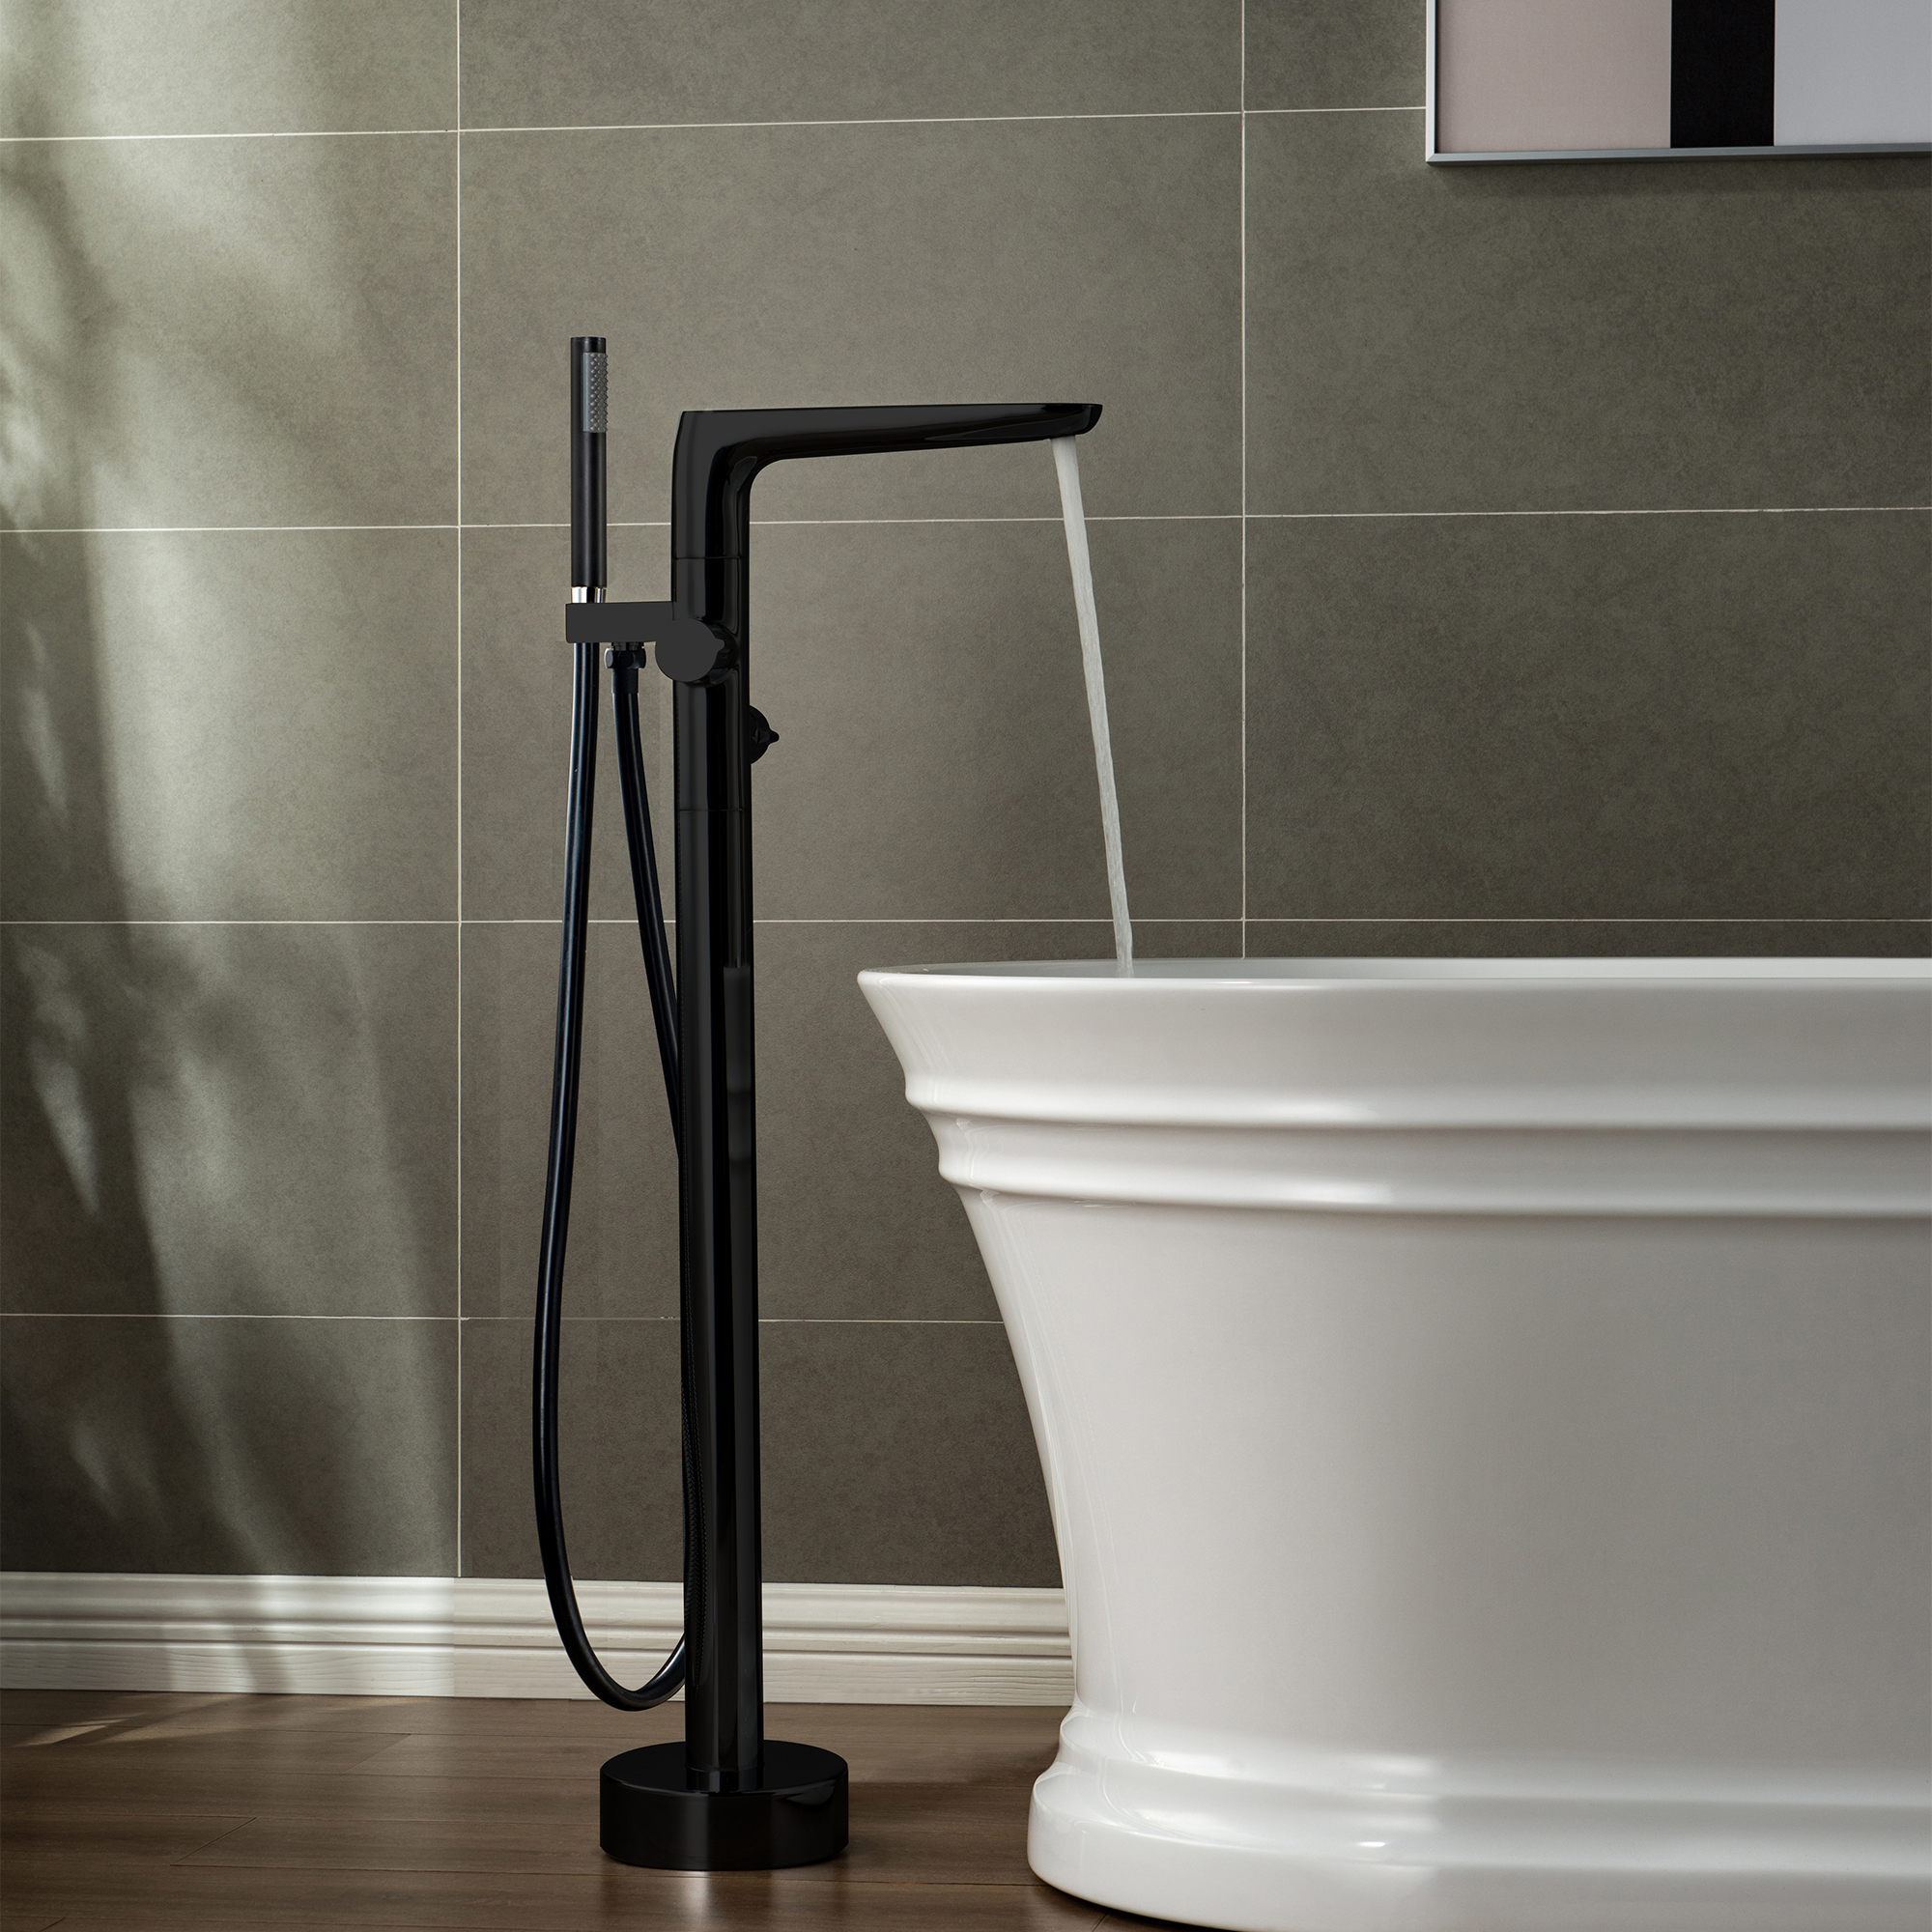  WOODBRIDGE F0015BL Contemporary Single Handle Floor Mount Freestanding Tub Filler Faucet with Hand shower in Matte Black Finish._12700